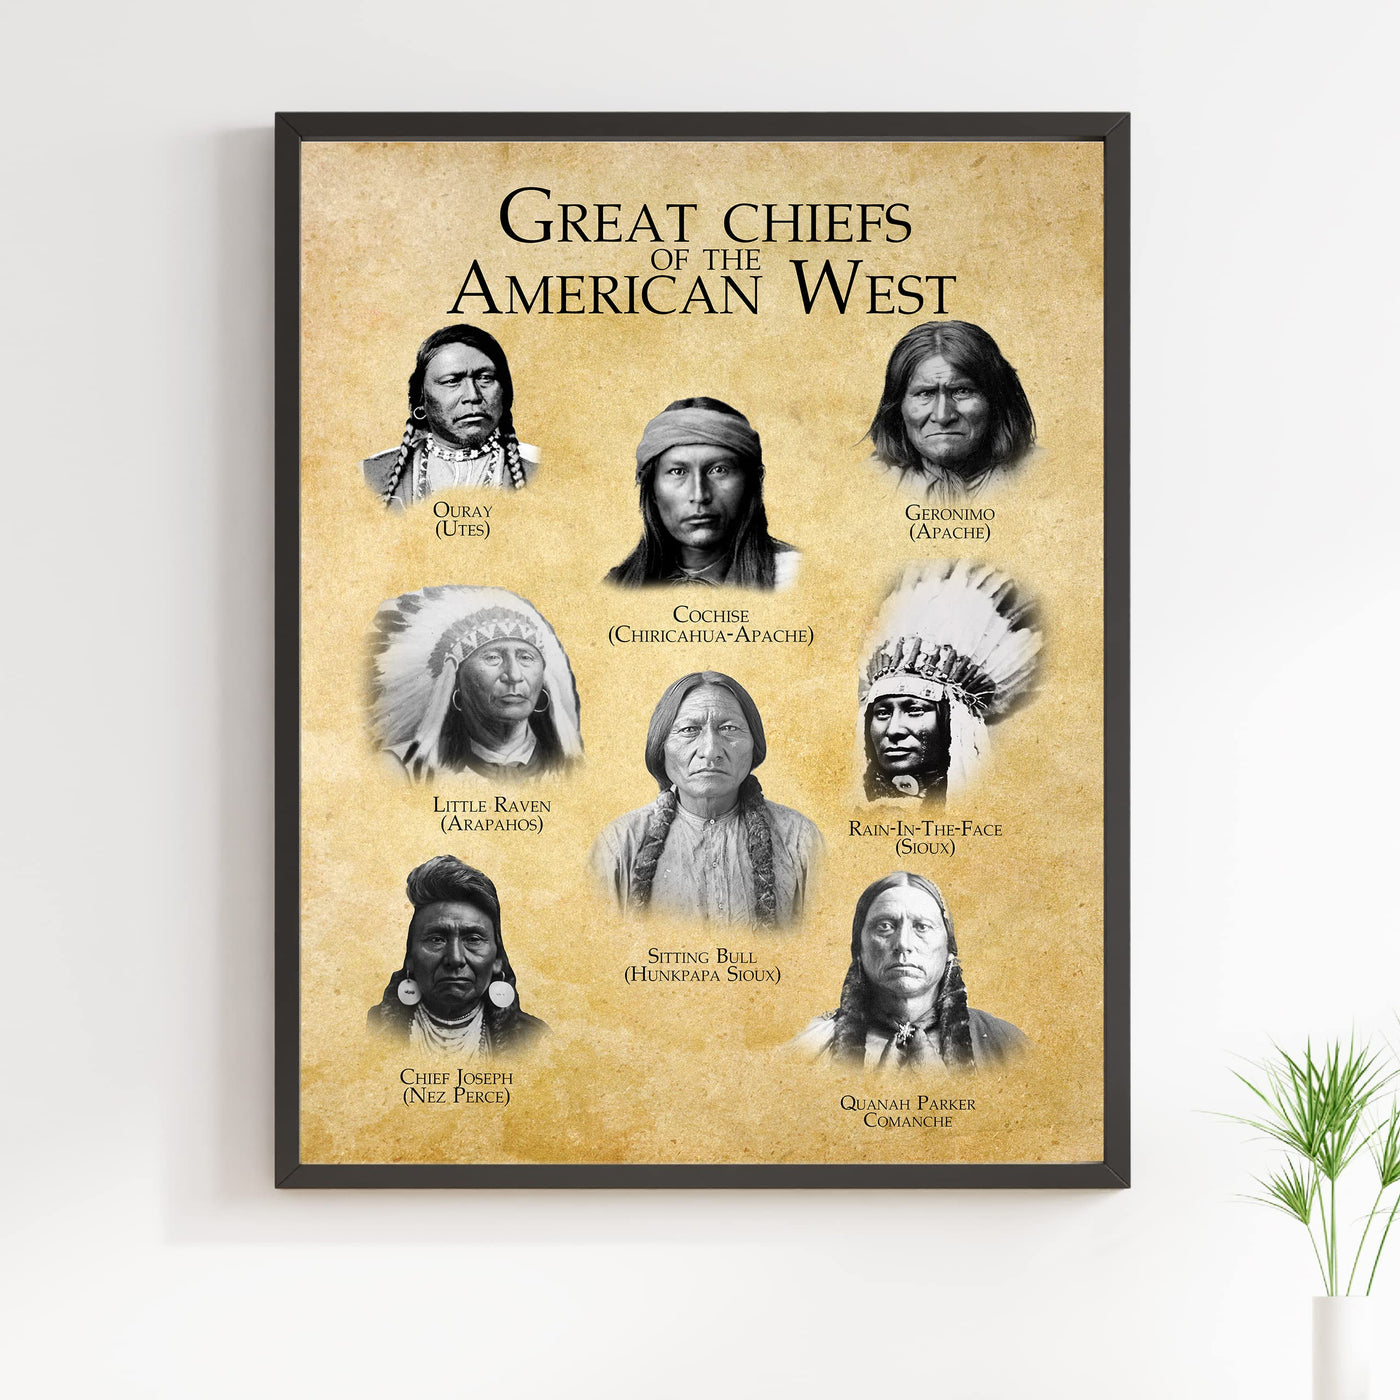 Great Chiefs of the American West Native American Indian Tribe Wall Art -11x14" Indian Chief Portrait Print -Ready to Frame. Spiritual Print w/Distressed Parchment Design. Home-Office-School Decor!